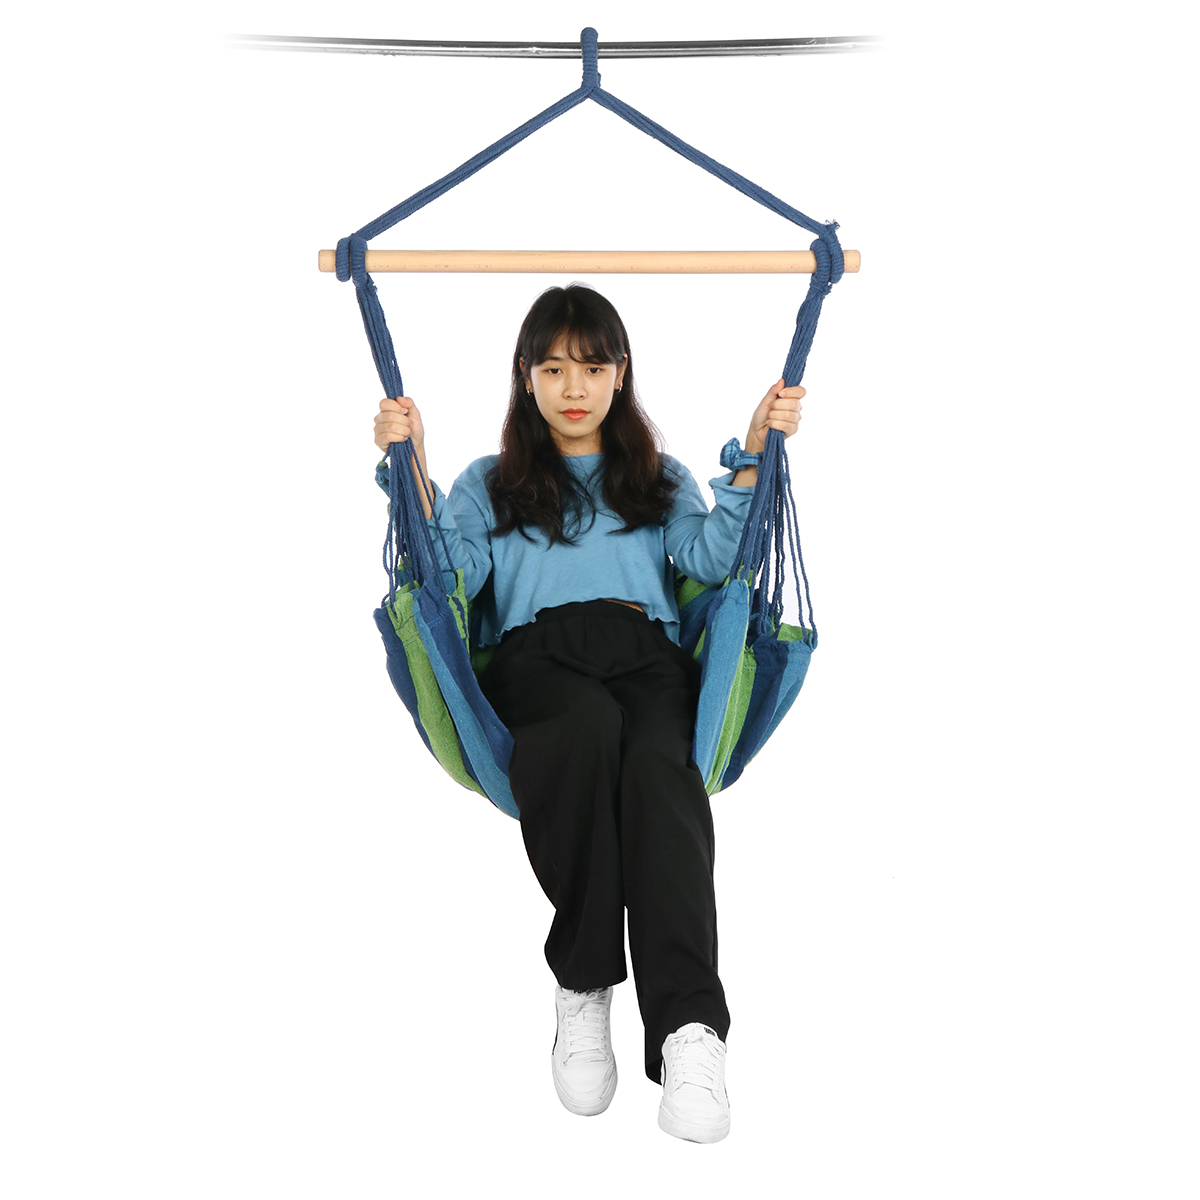 Hammock-Chair-Camping-Hanging-Rope-Swing-Outdoor-Picnic-Hiking-Travel-1697620-6